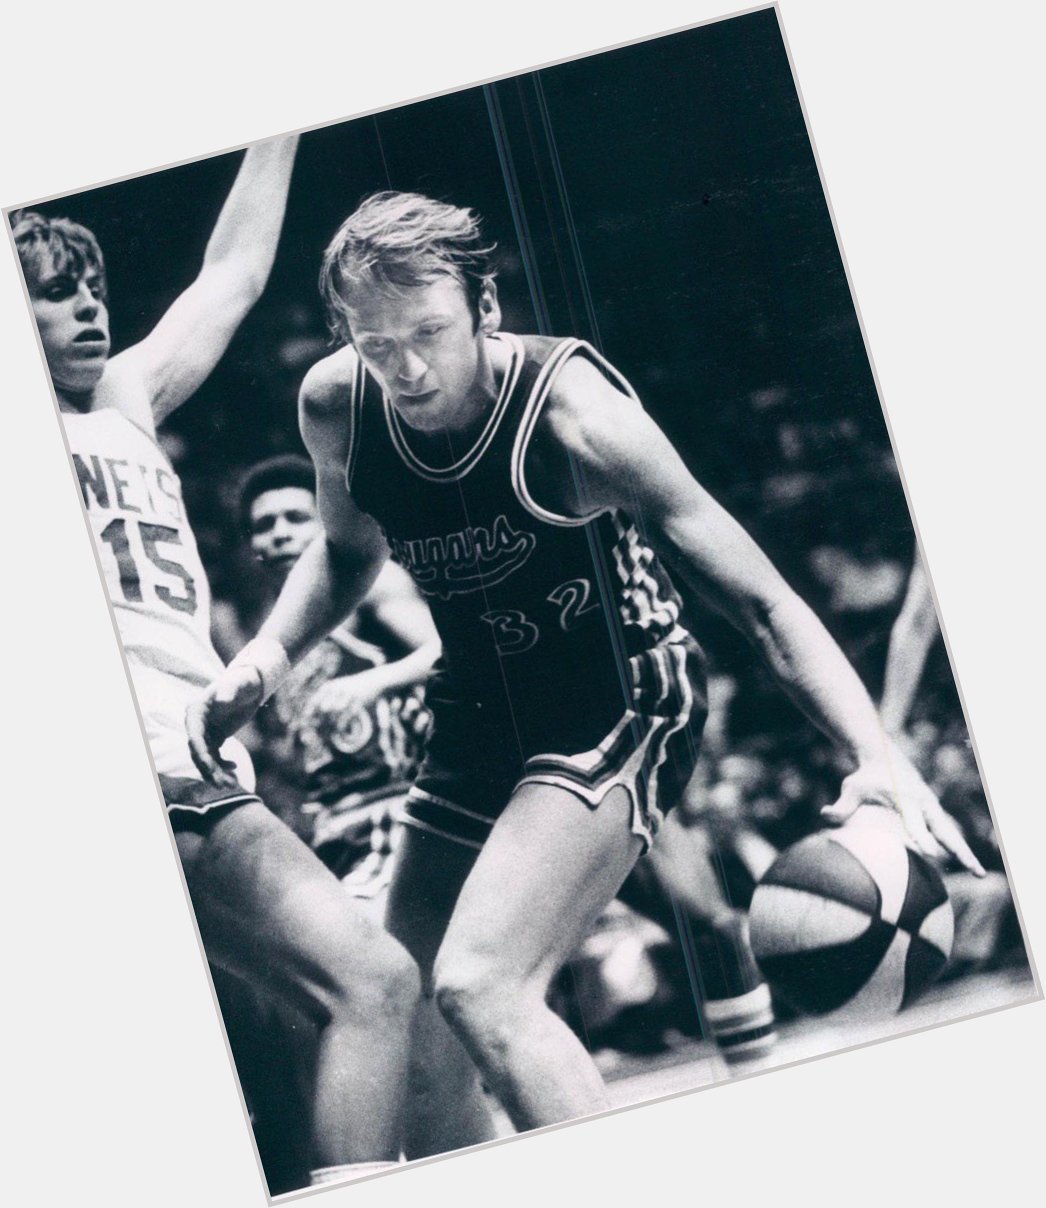 Happy Birthday to Billy Cunningham the Greatest Carolina Cougar of all time!! 